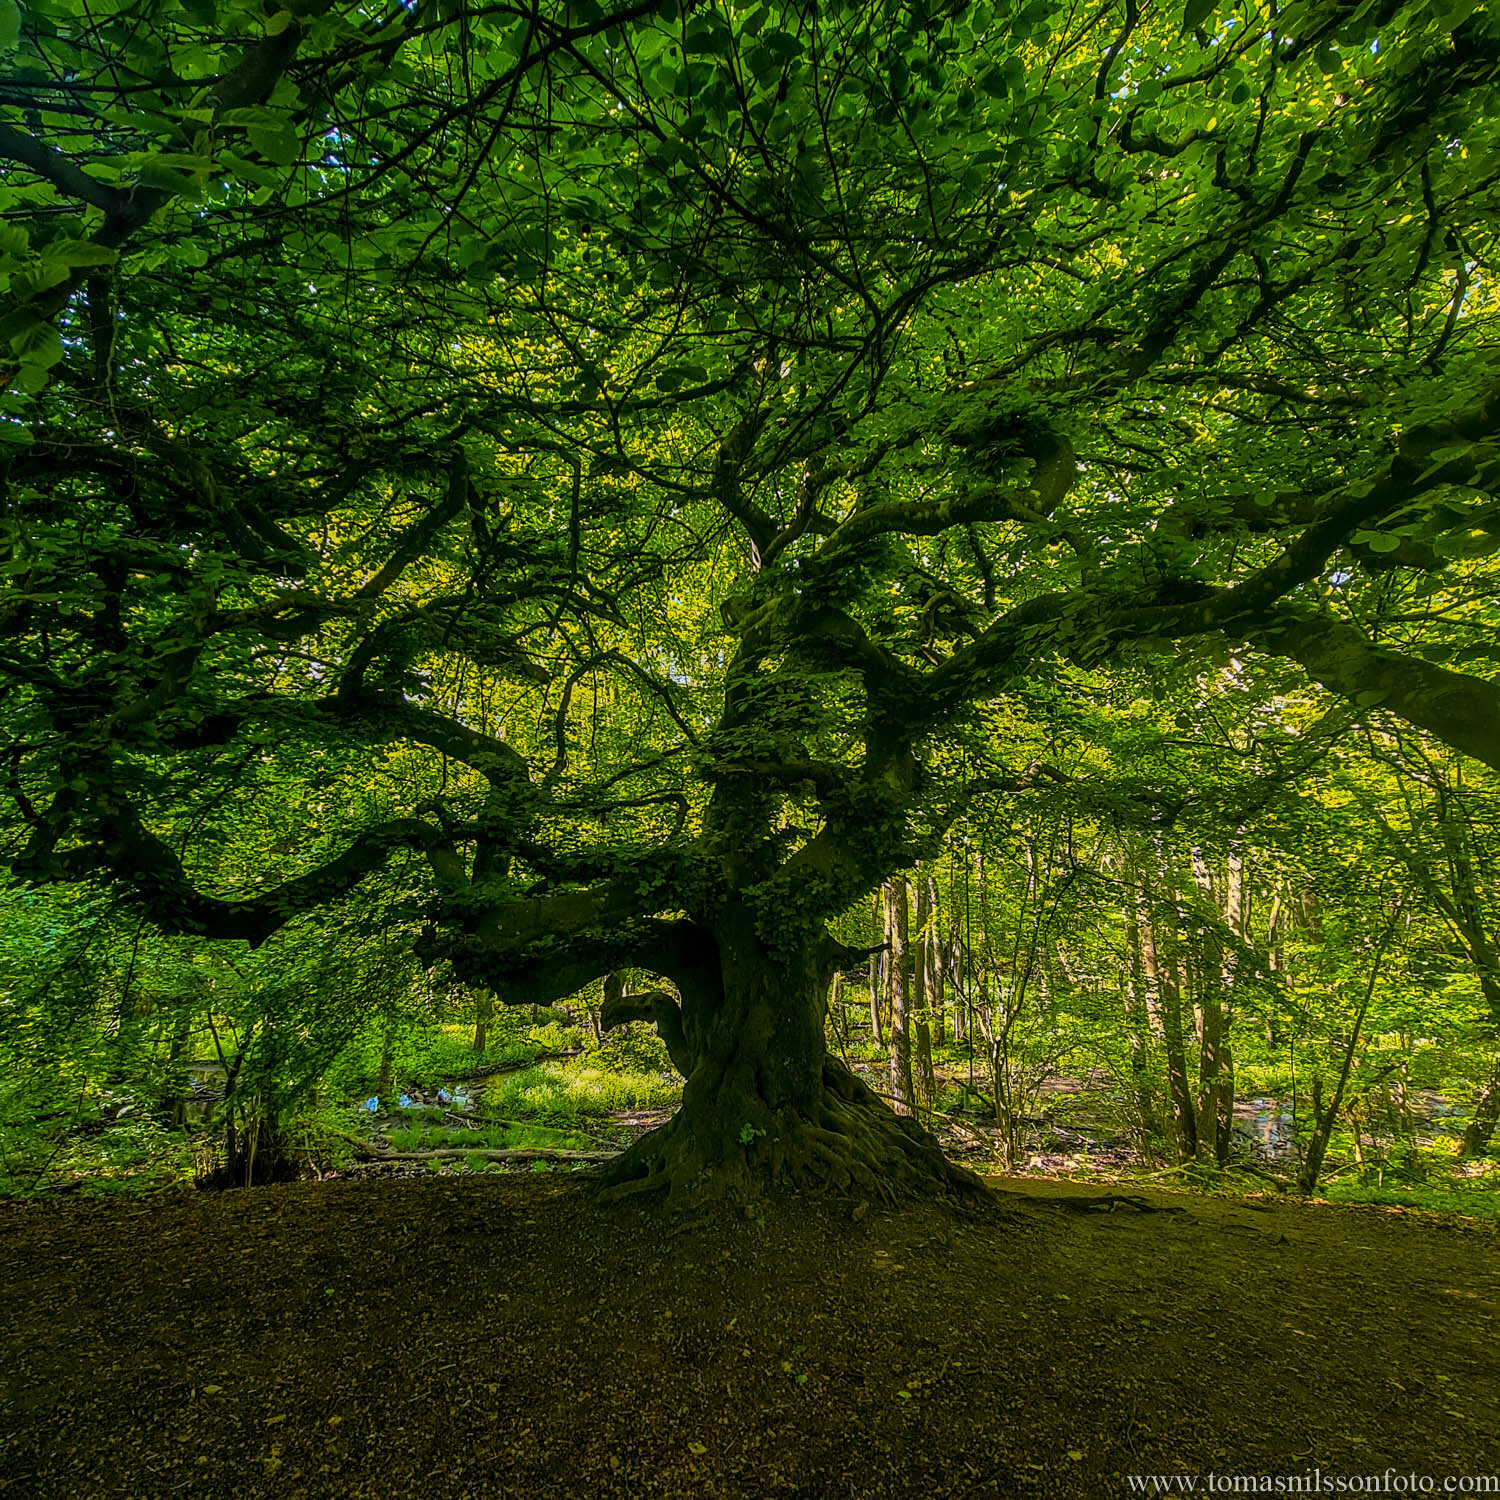 Day 152 - June 1:  Under An Ancient Canopy